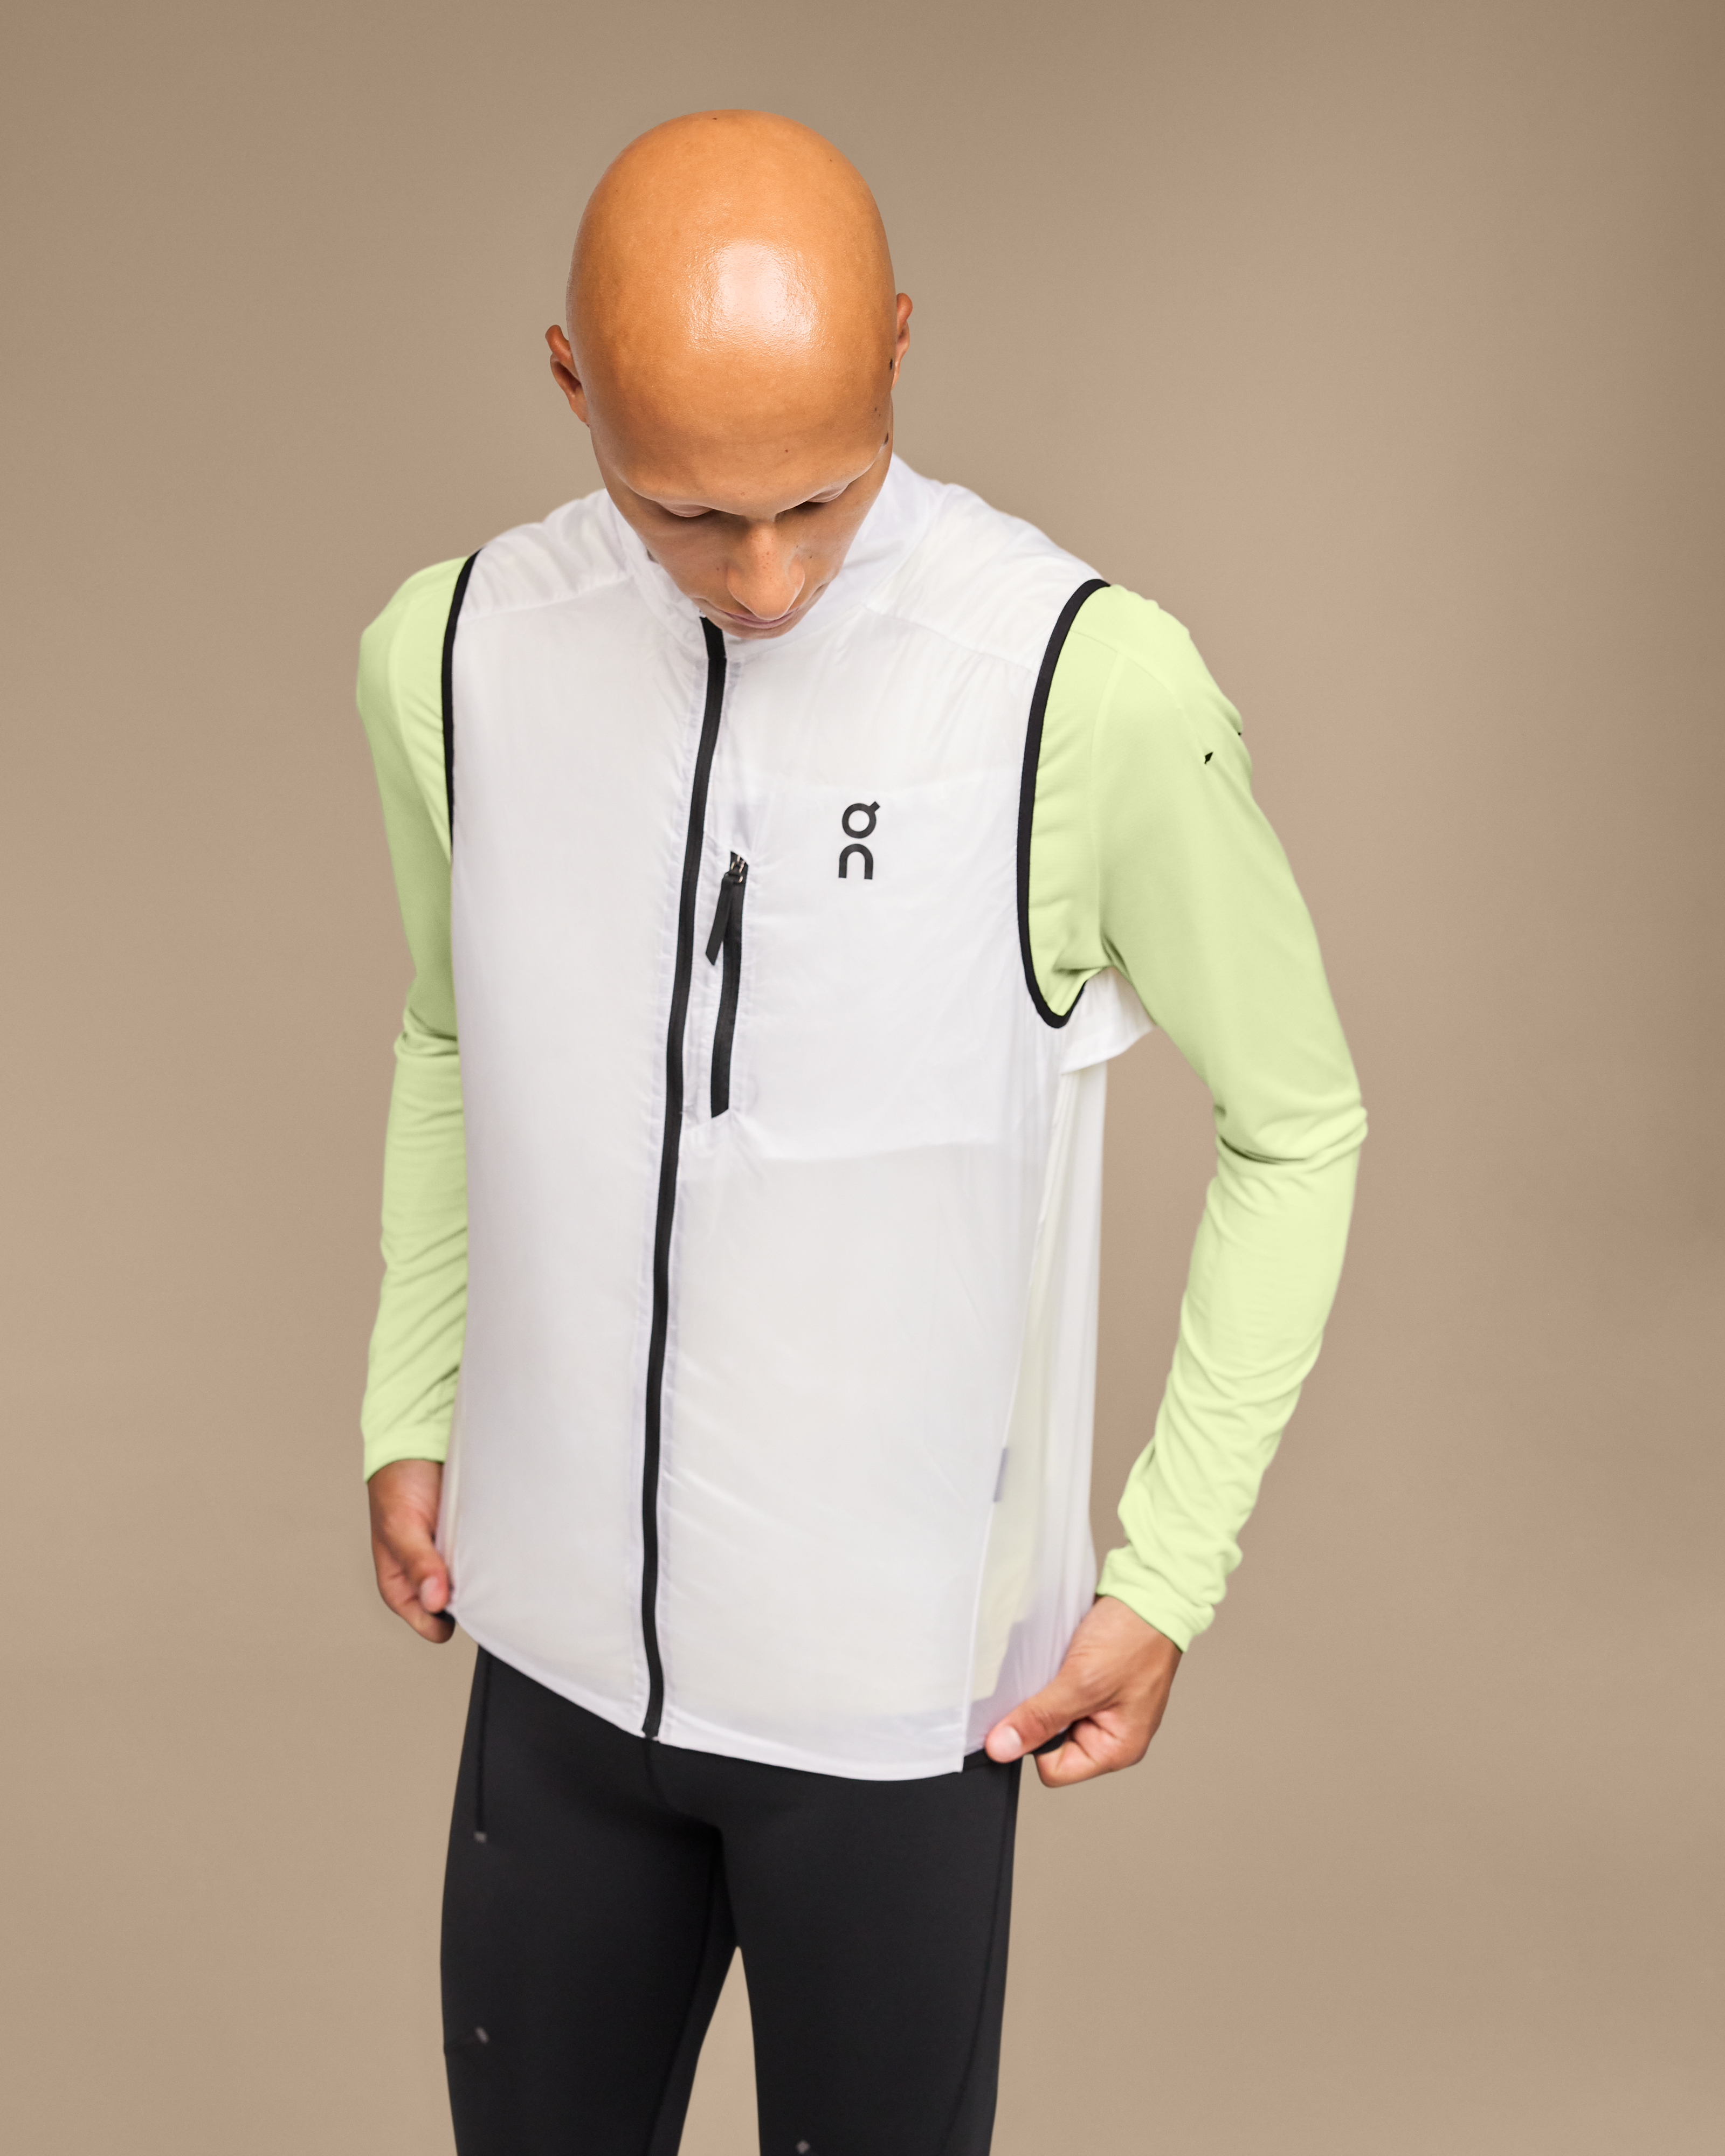 mens warm weather vest - OFF-61% >Free Delivery